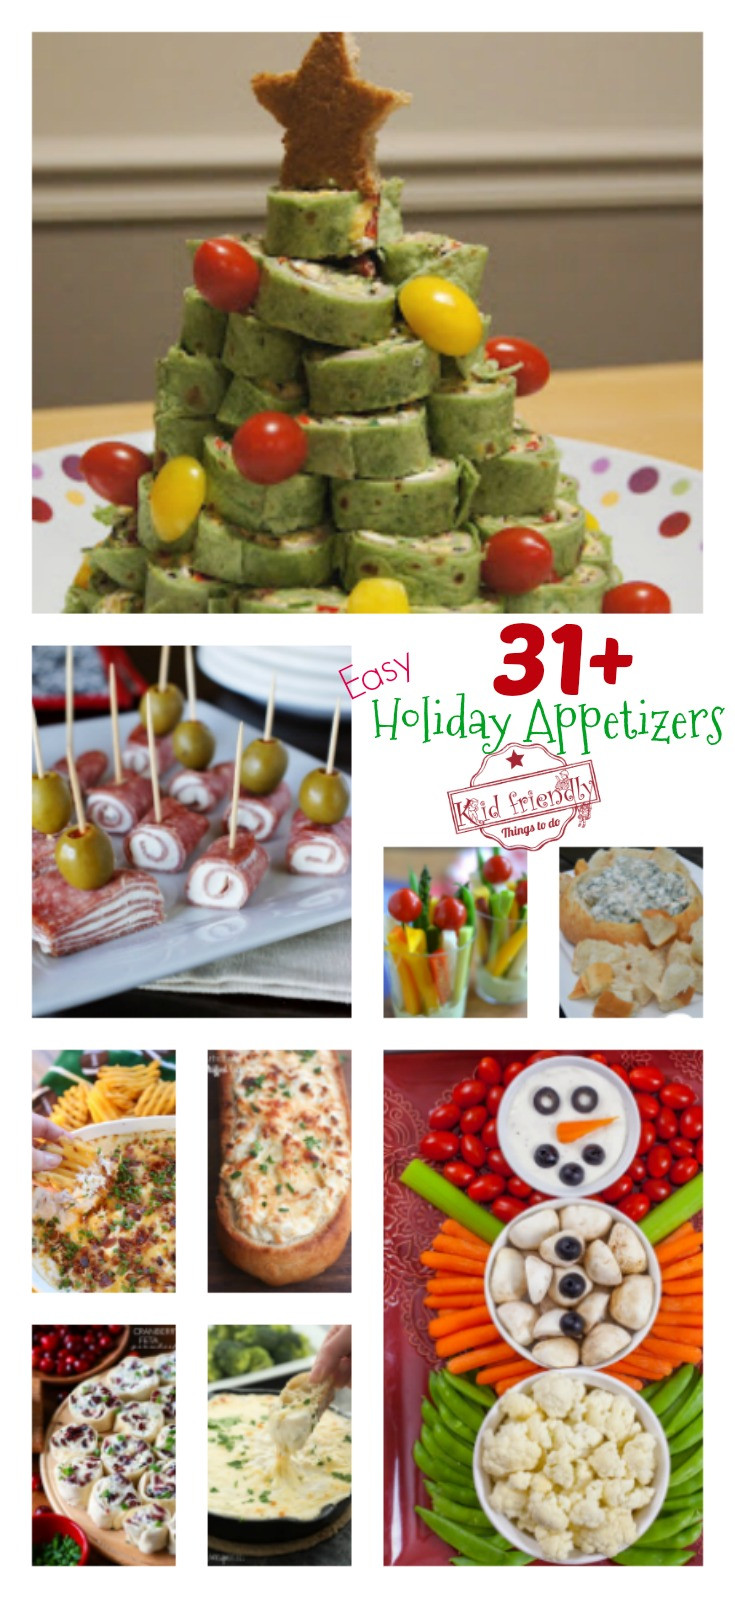 Simple Christmas Appetizers
 Over 31 Easy Holiday Appetizers to Make for Christmas New